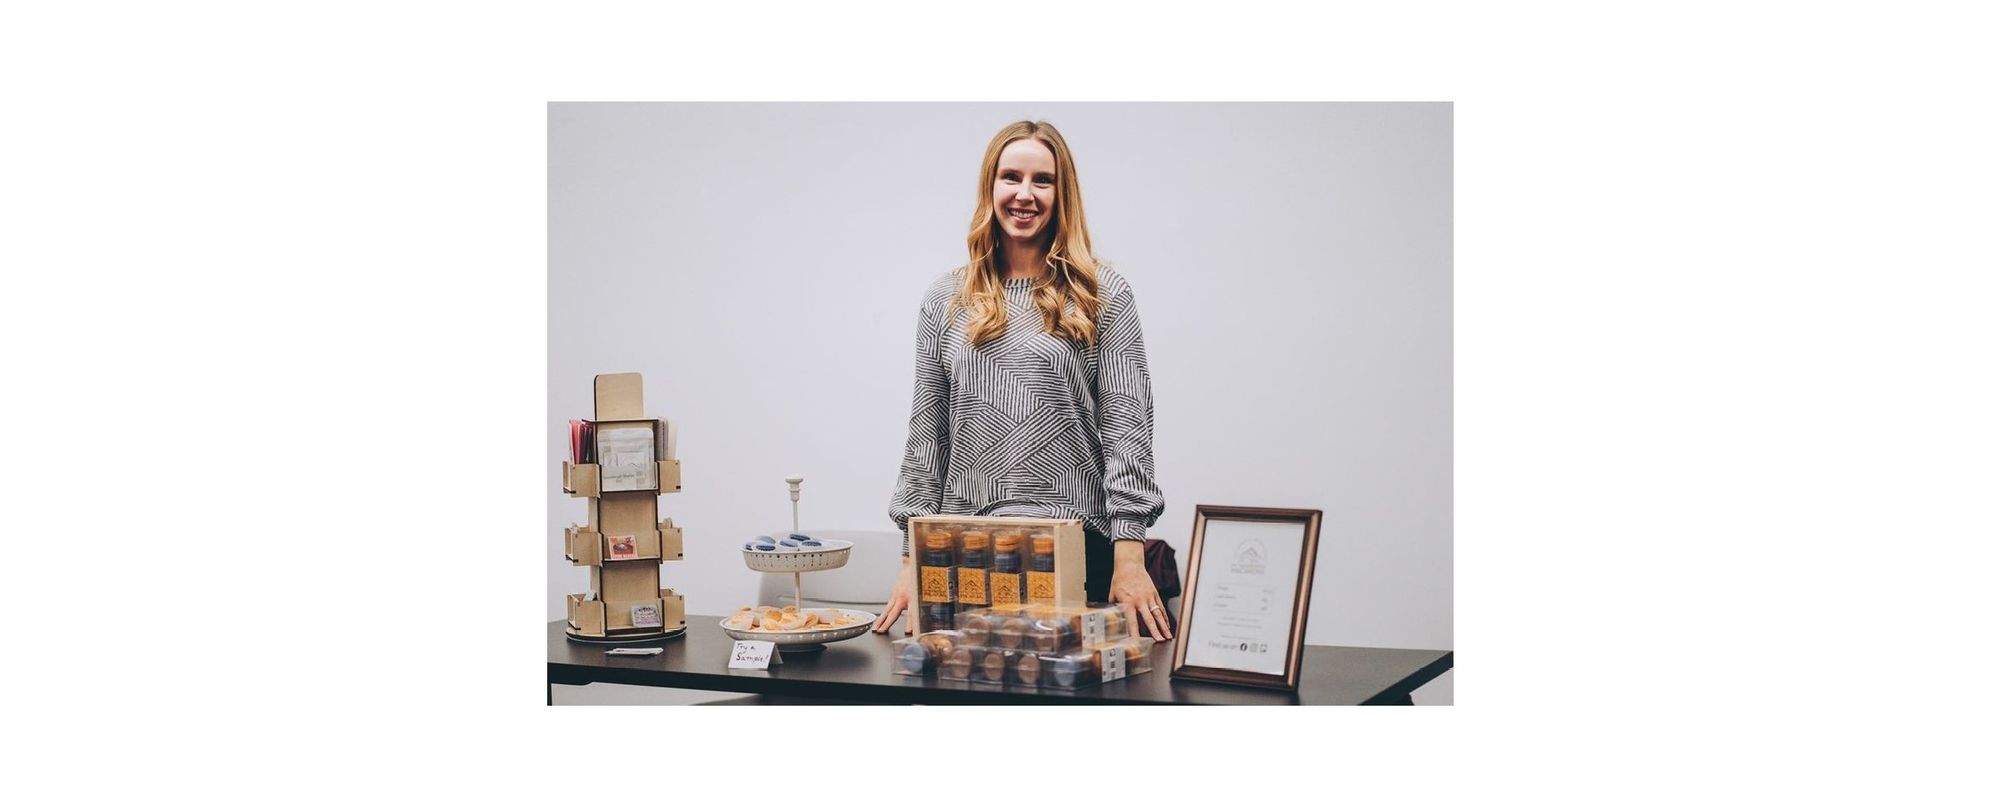 Specializing in Small-batch Macarons - Emily Soule